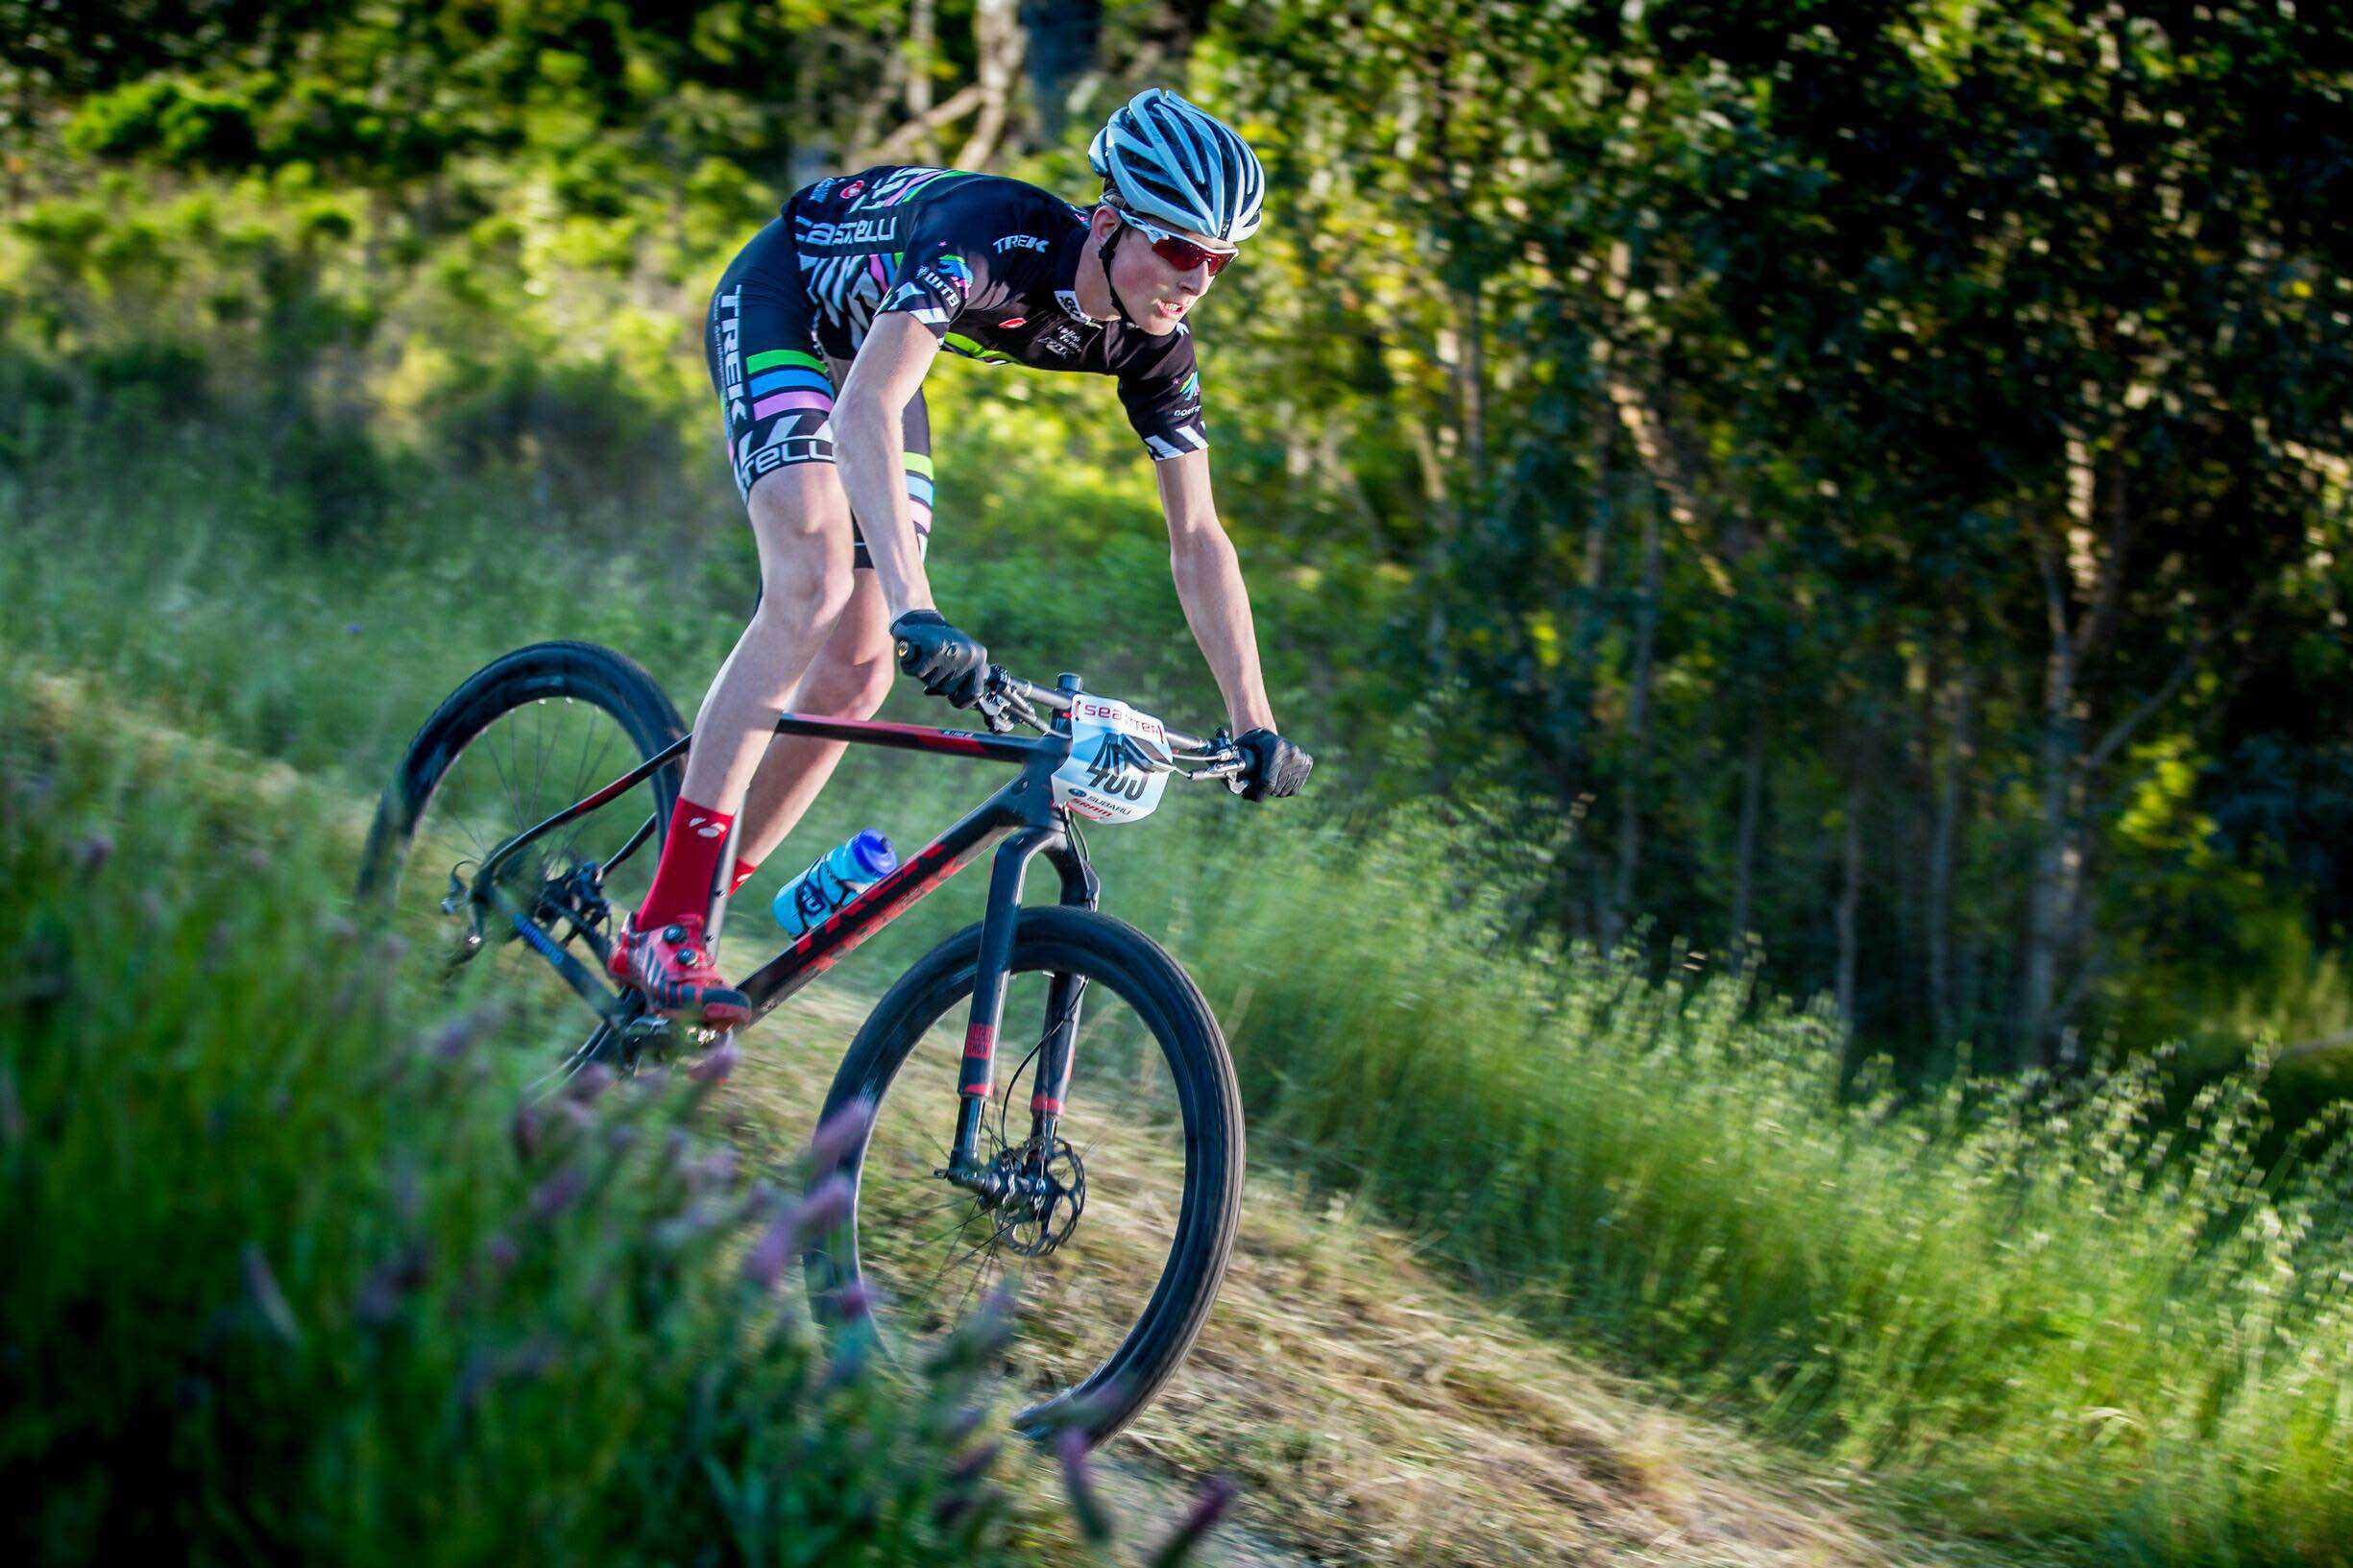 Athlete Q & A with Liam Howard (Tam Mountain Biker) - The Tam News